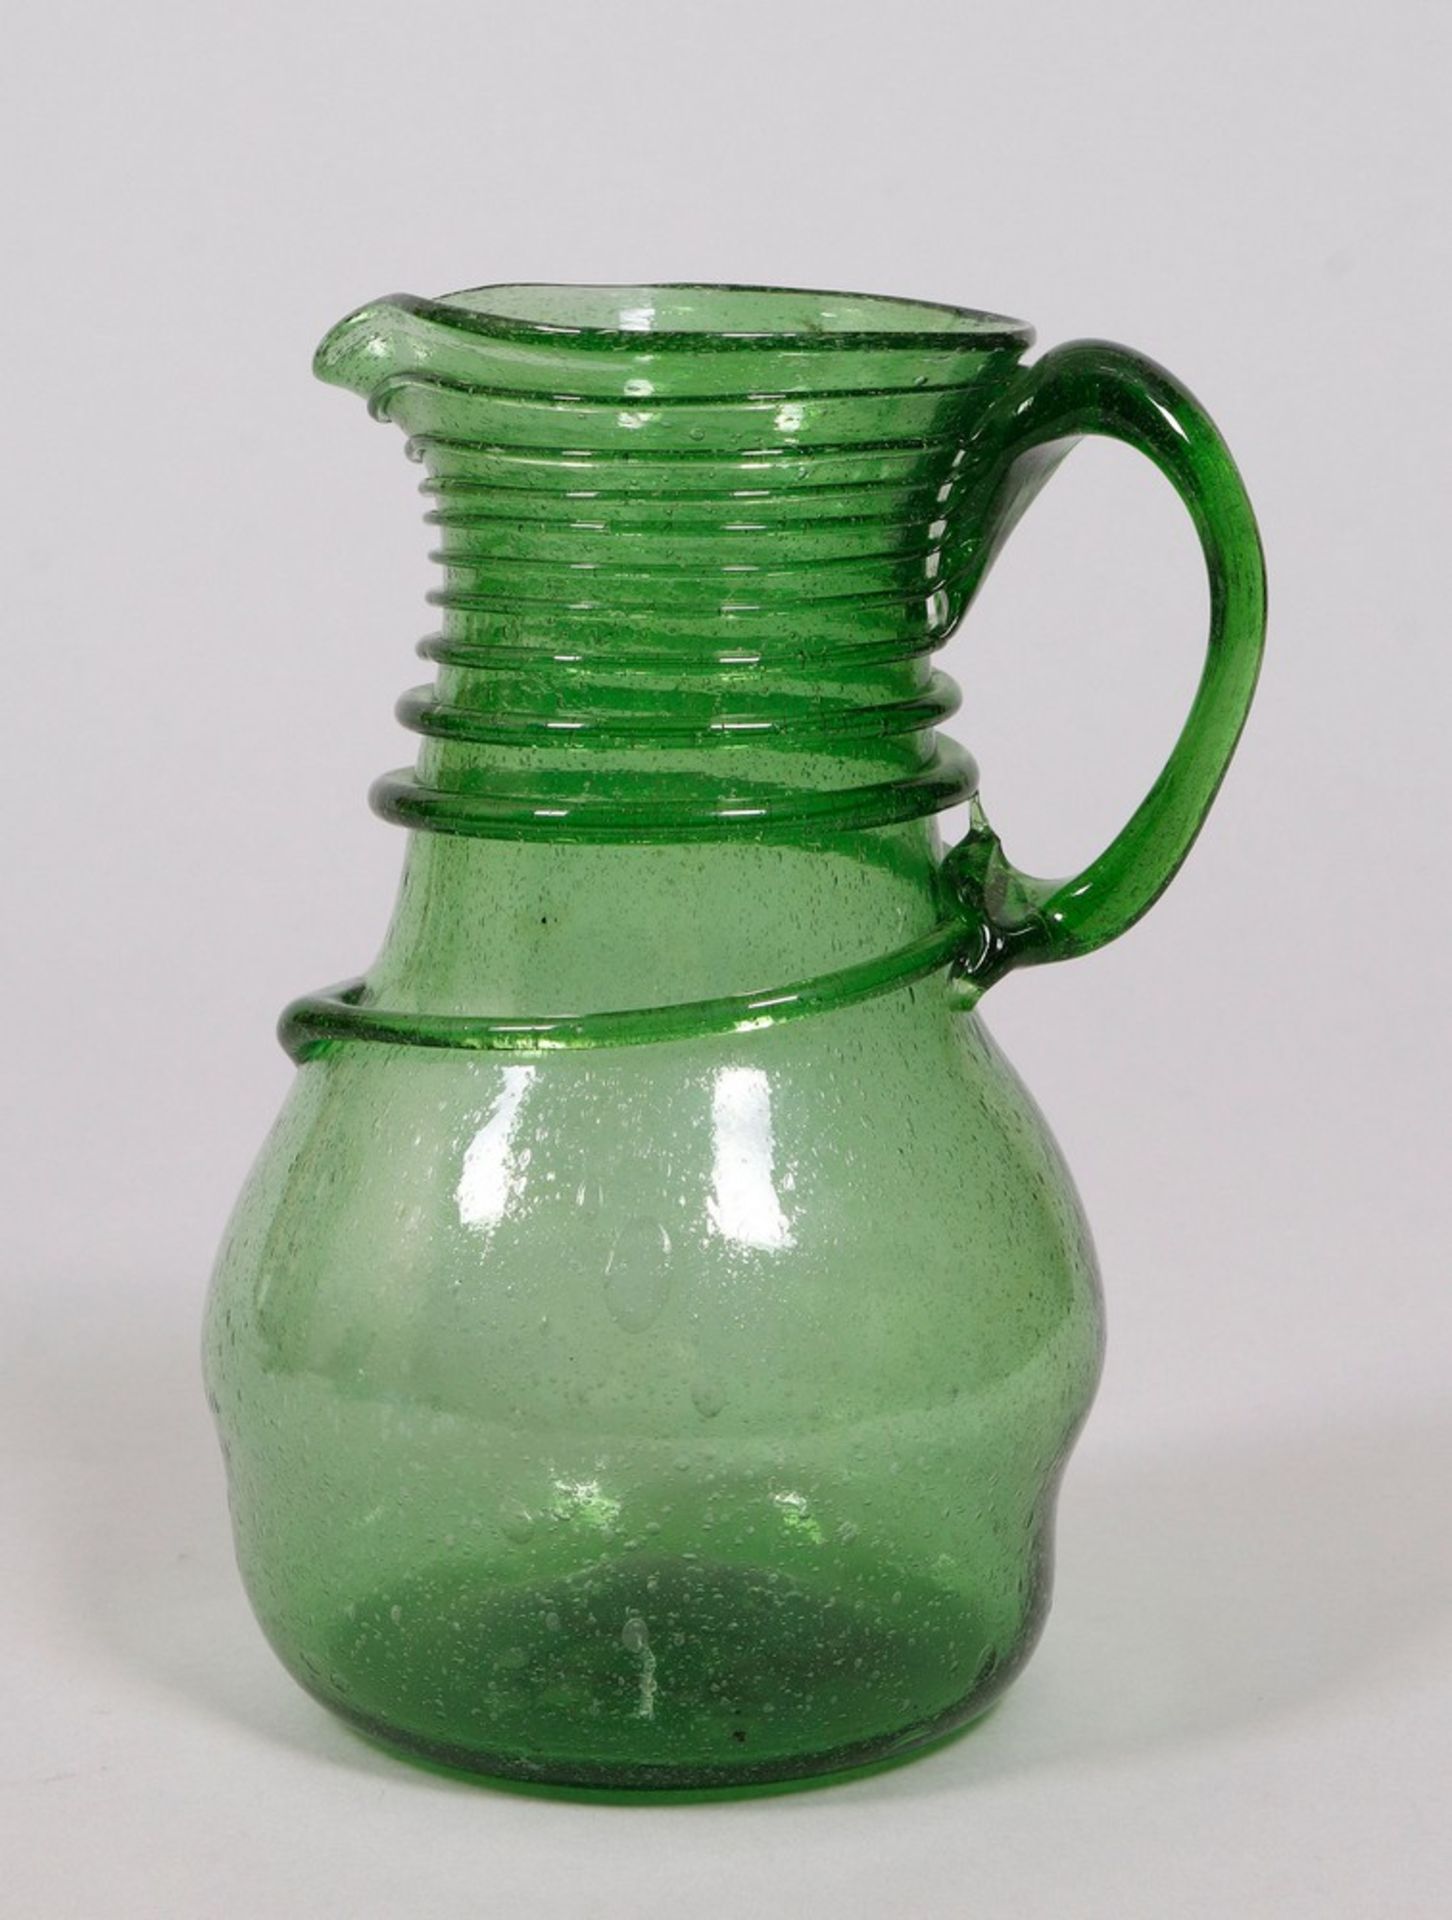 Mixed lot of glass jugs in green, 3 pieces, German/Bohemian, 19th/20th C. - Image 5 of 6